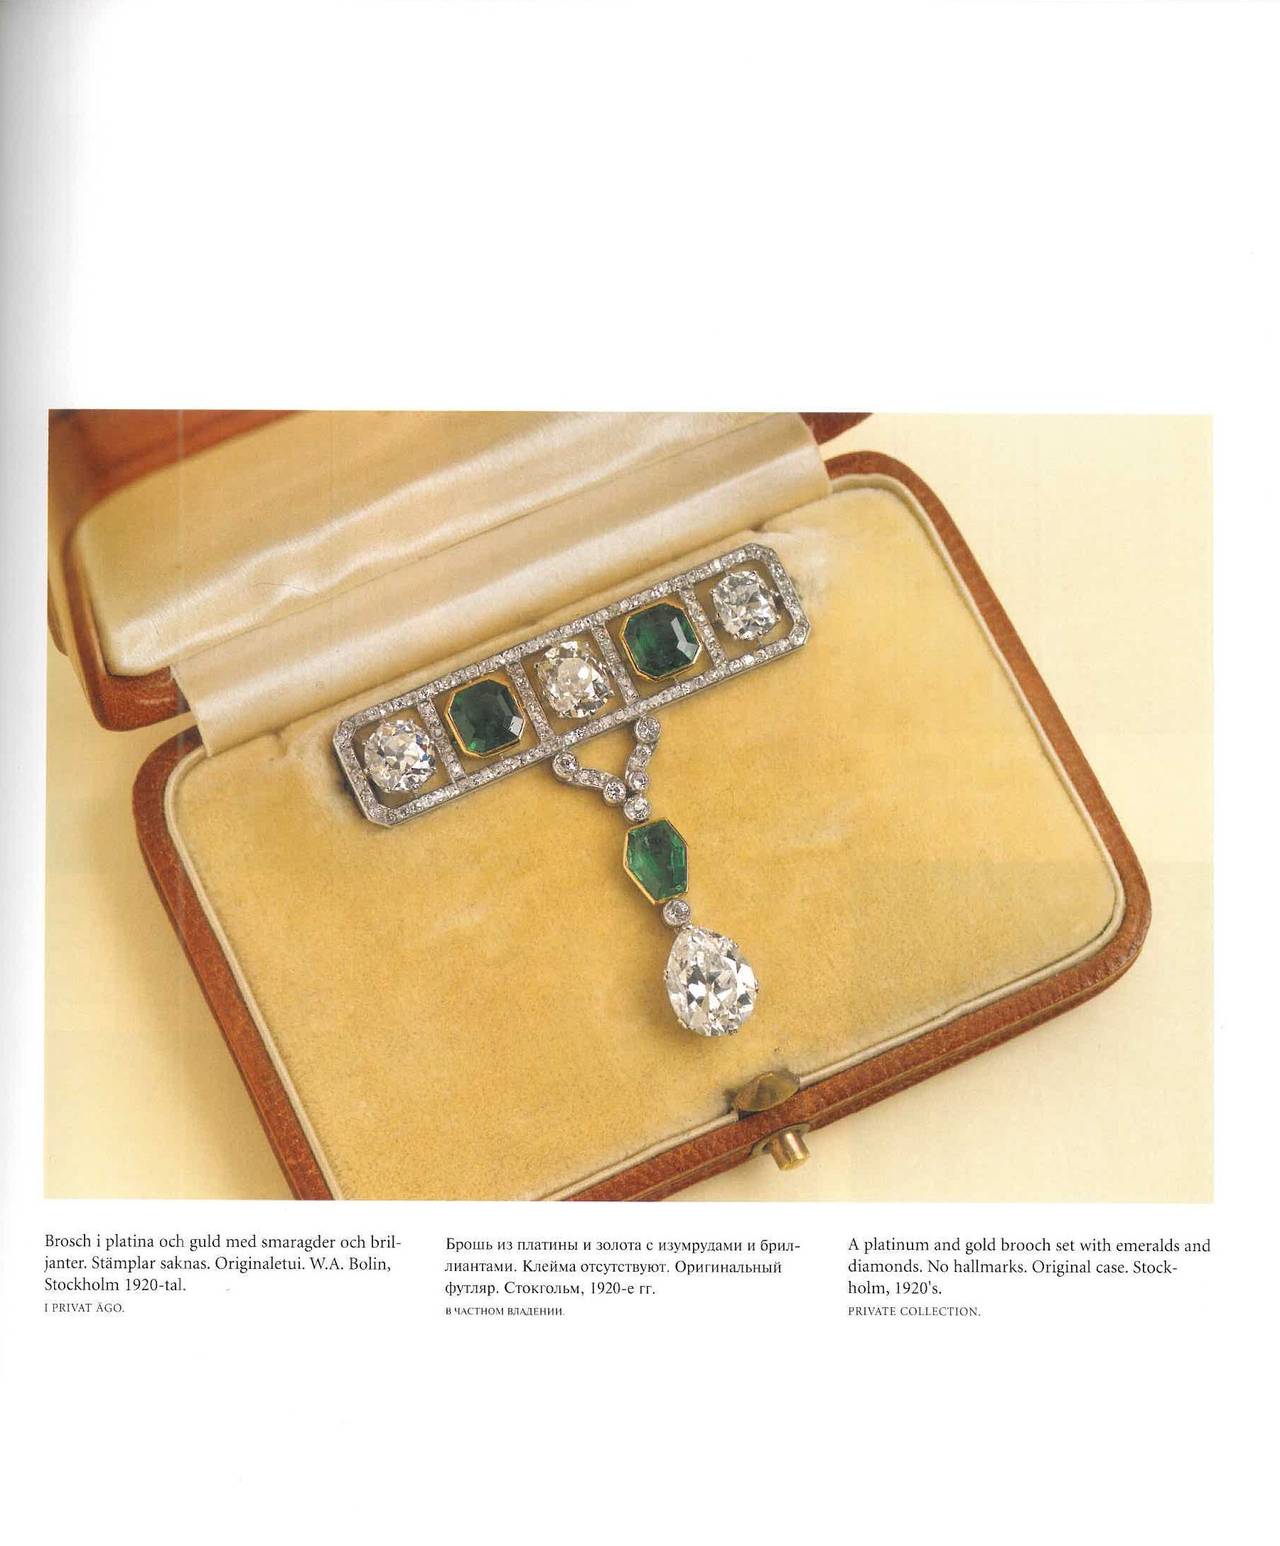 Women's Book of W.A.Bolin Jewelry and Silver for Tsars Queens and Others